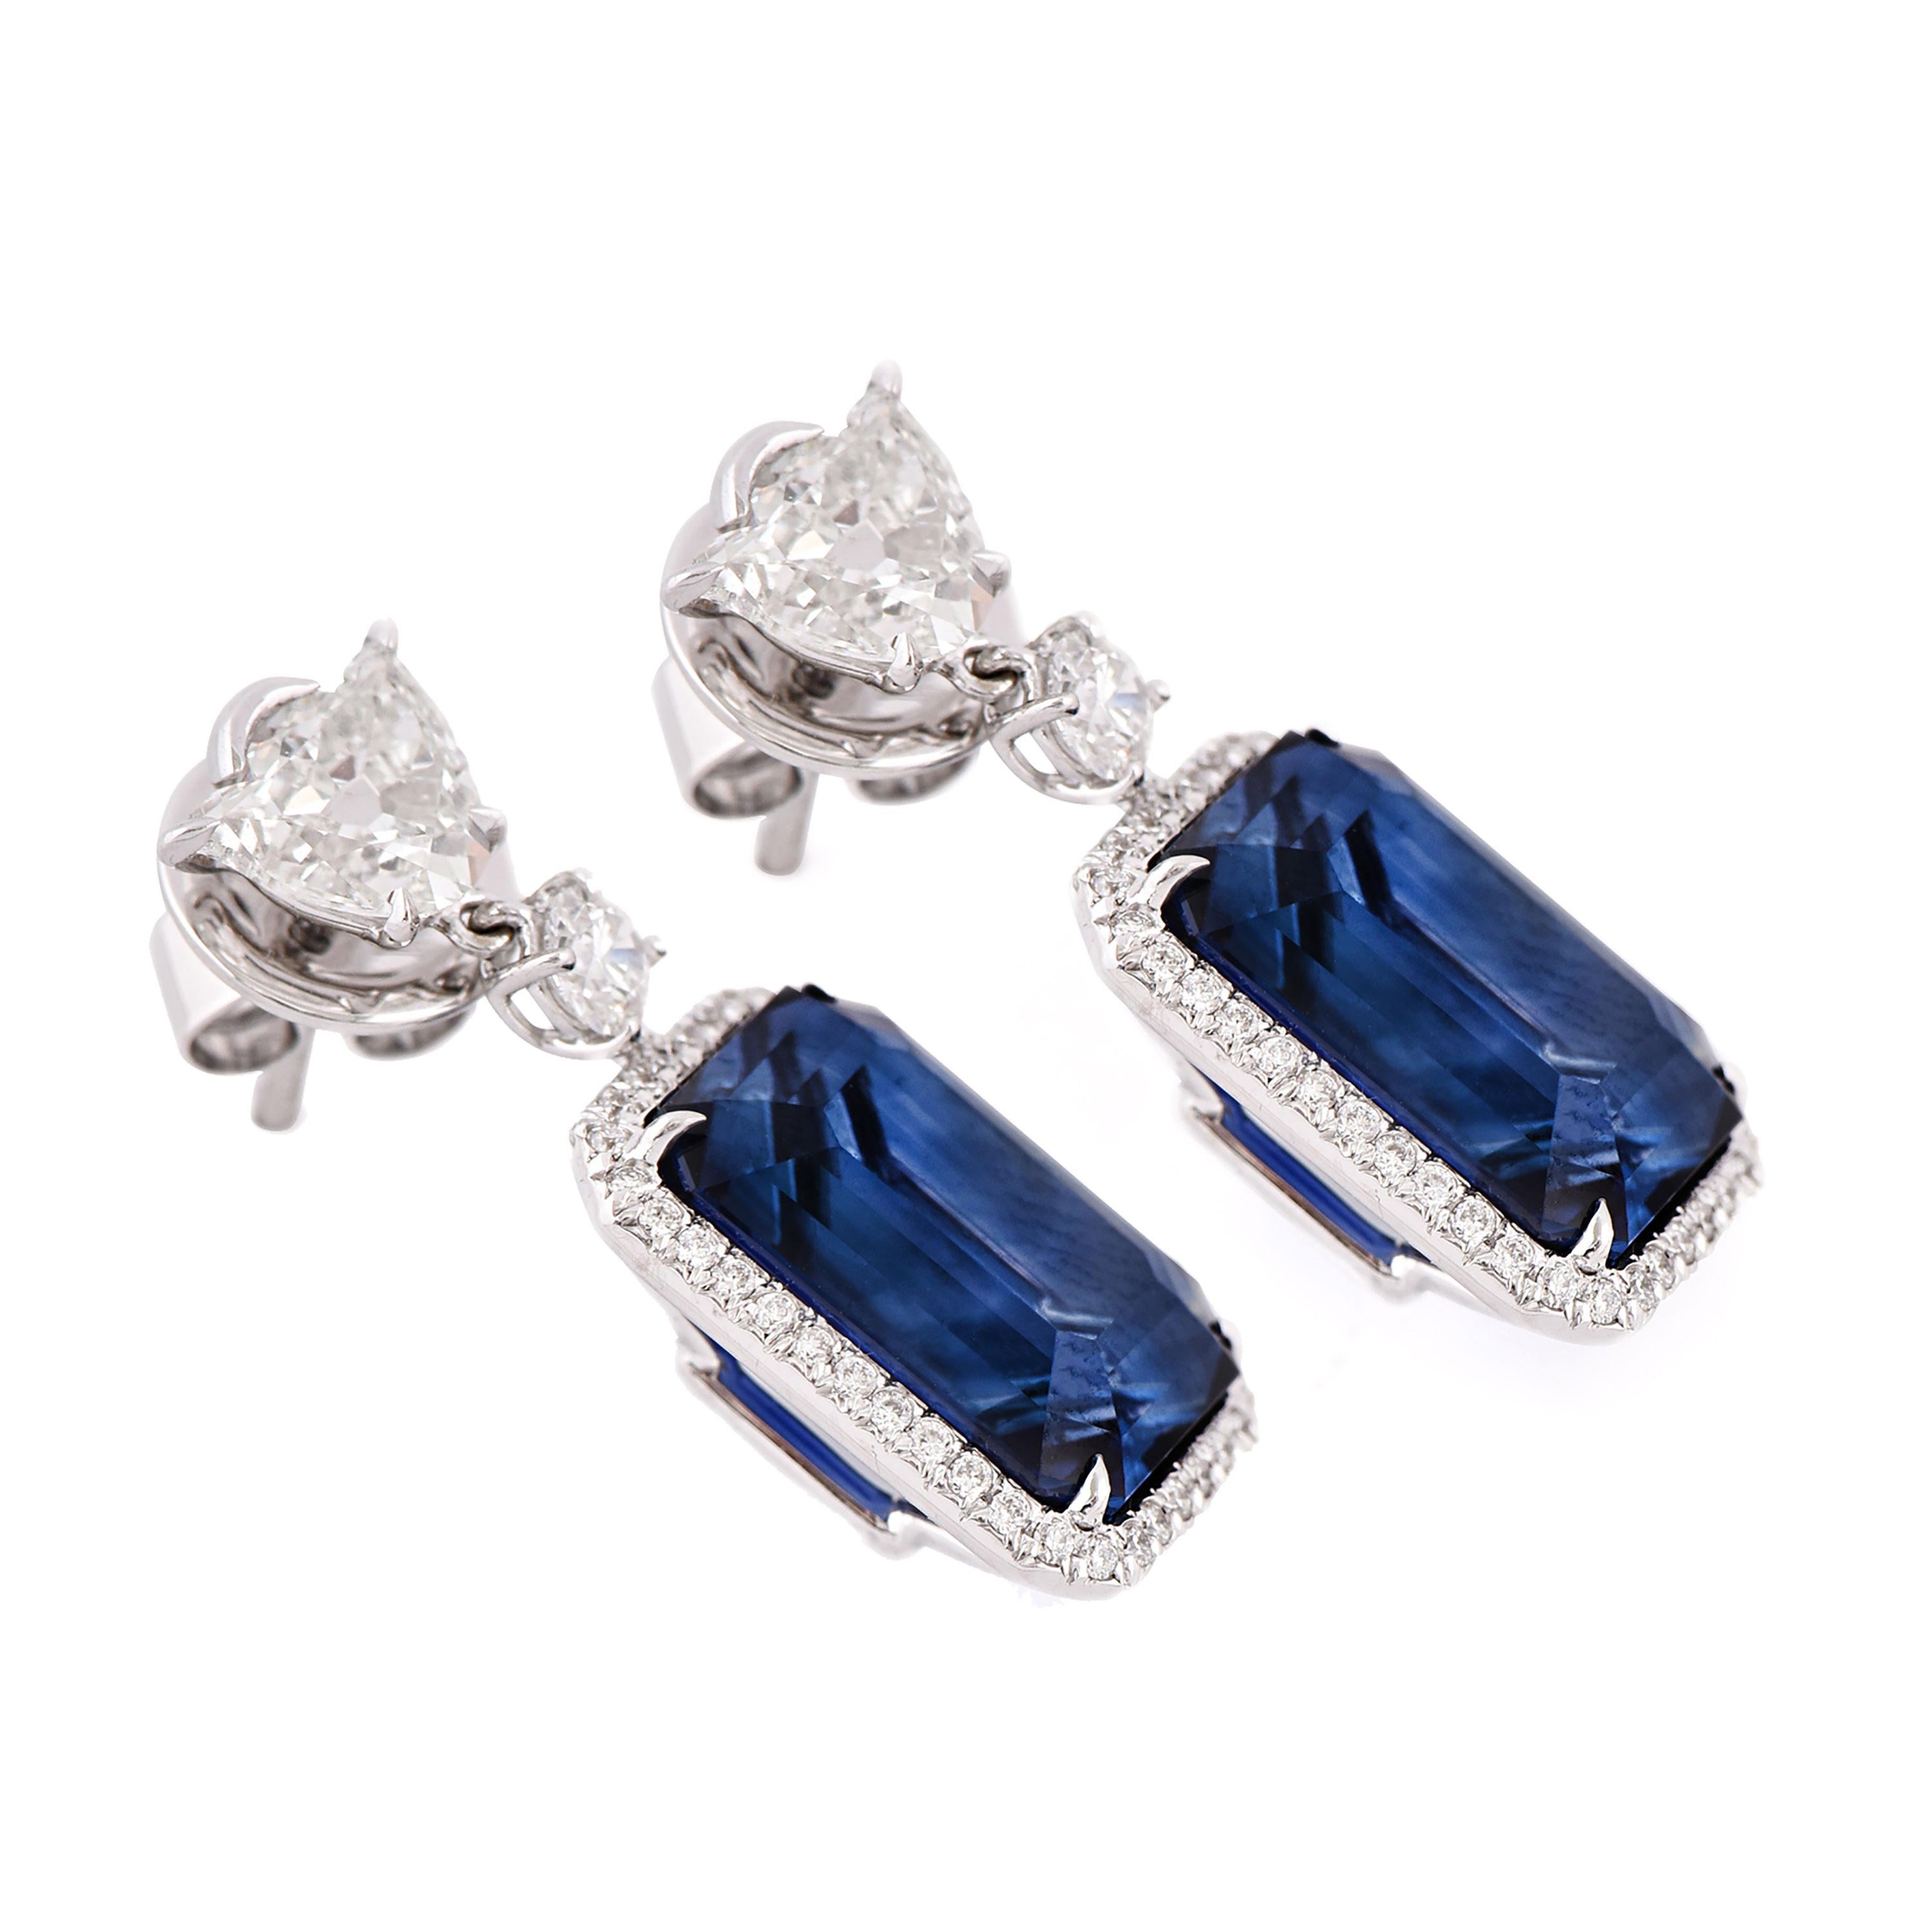 A pair of 18 karat white gold blue sapphire dangle earrings from the Azure collection of Laviere. The earrings are set with two GRS certified vivid blue Madagascar blue sapphires weighing a total of 15.97 carats, 1.40 carats tulip shape diamonds and